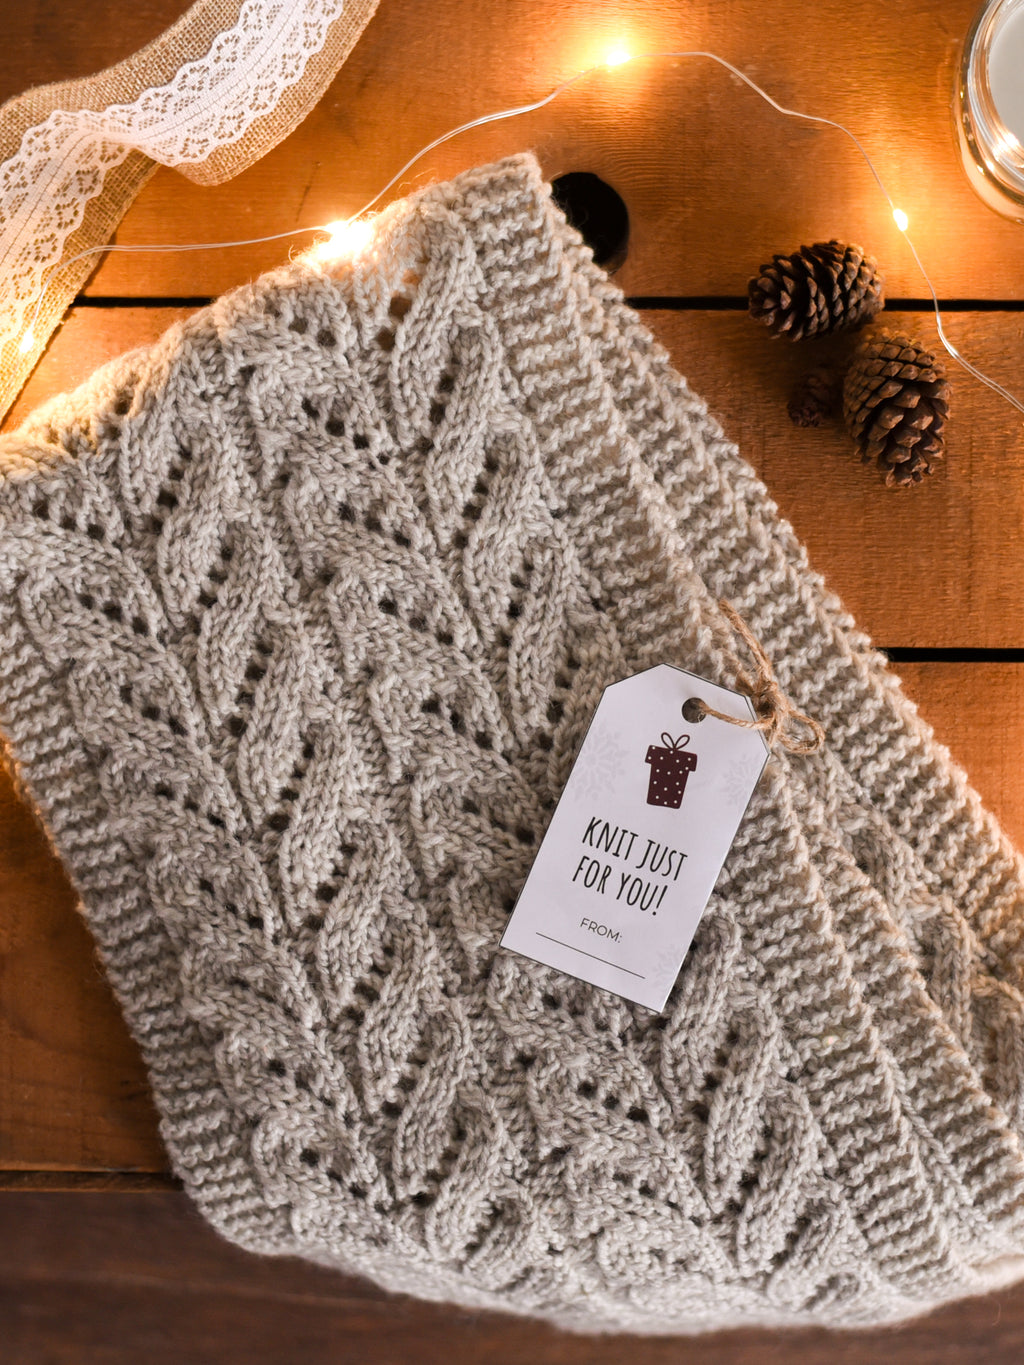 Free Printable Gift Tags - Hand knit with Love